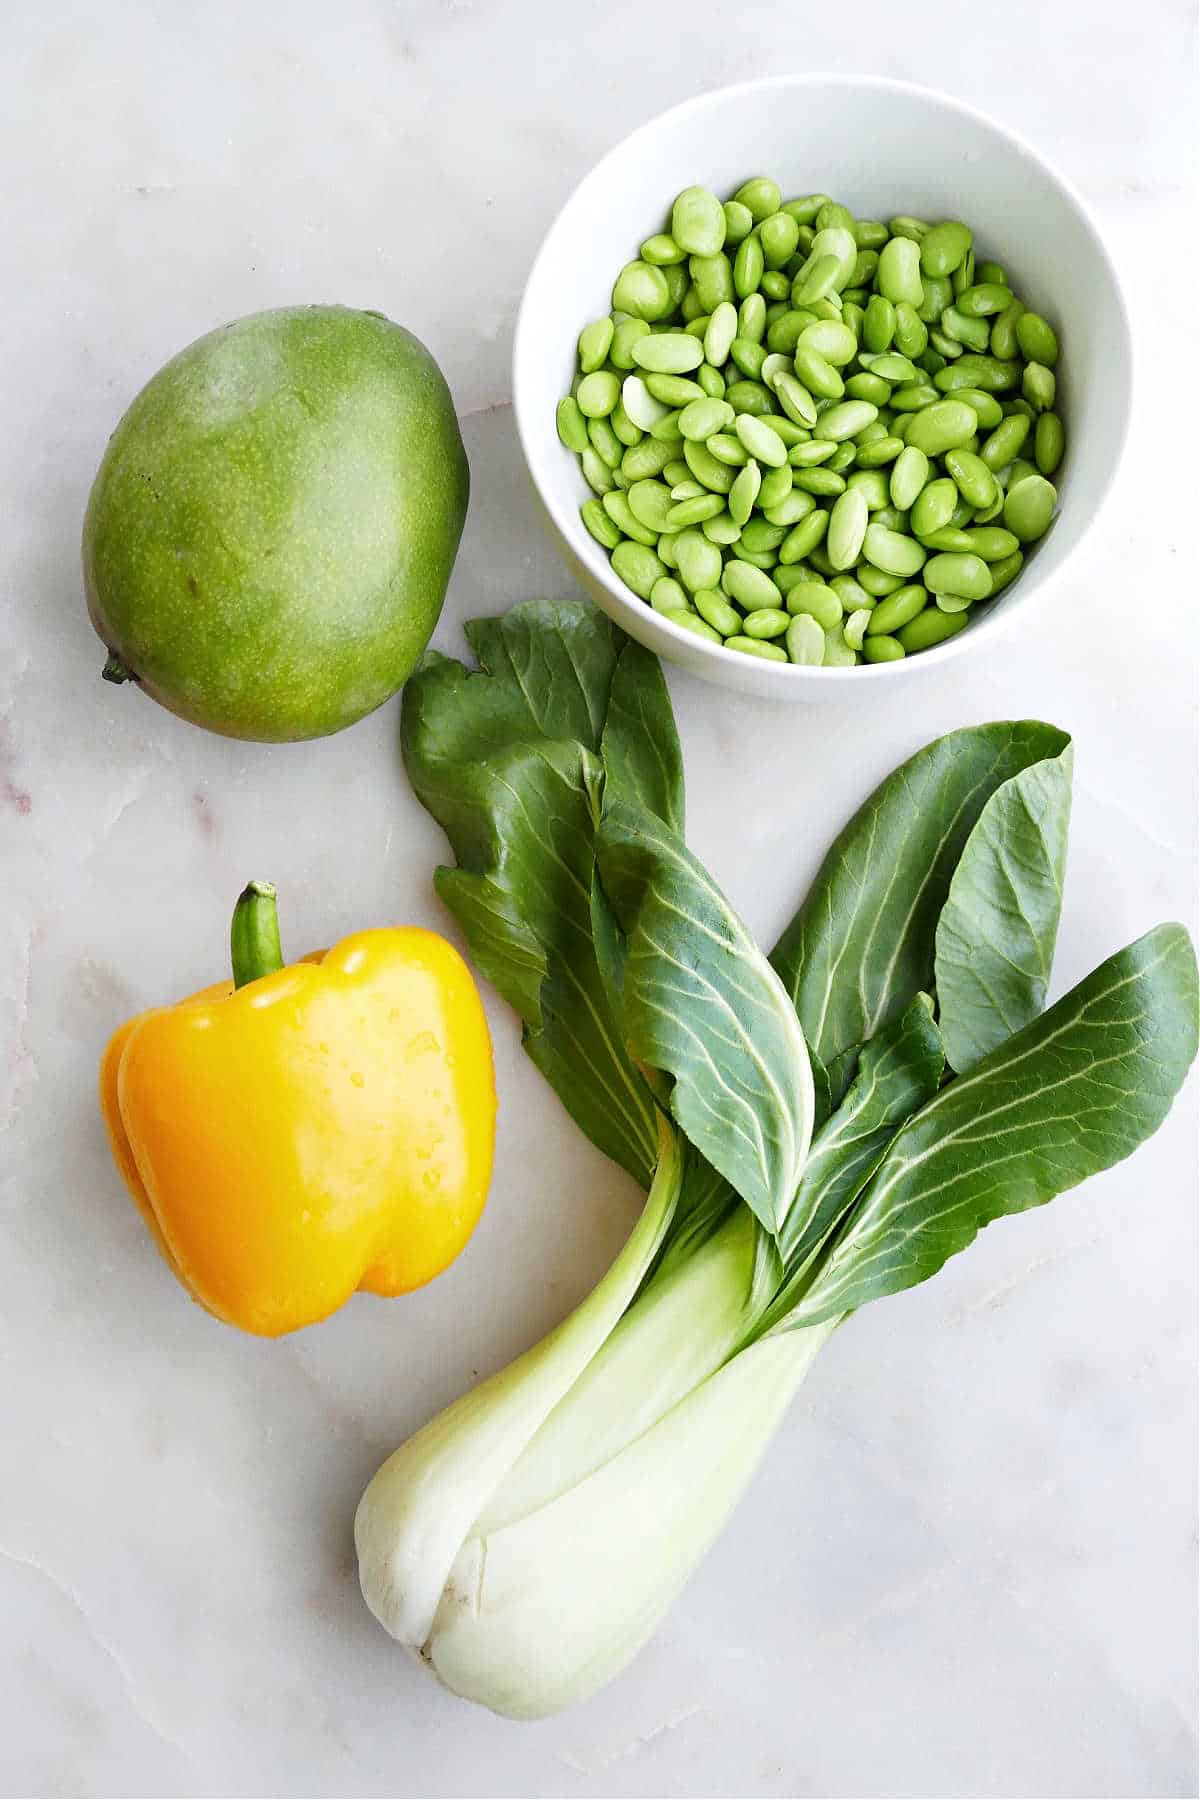 mango, bell pepper, edamame, and bok choy next to each other on a counter